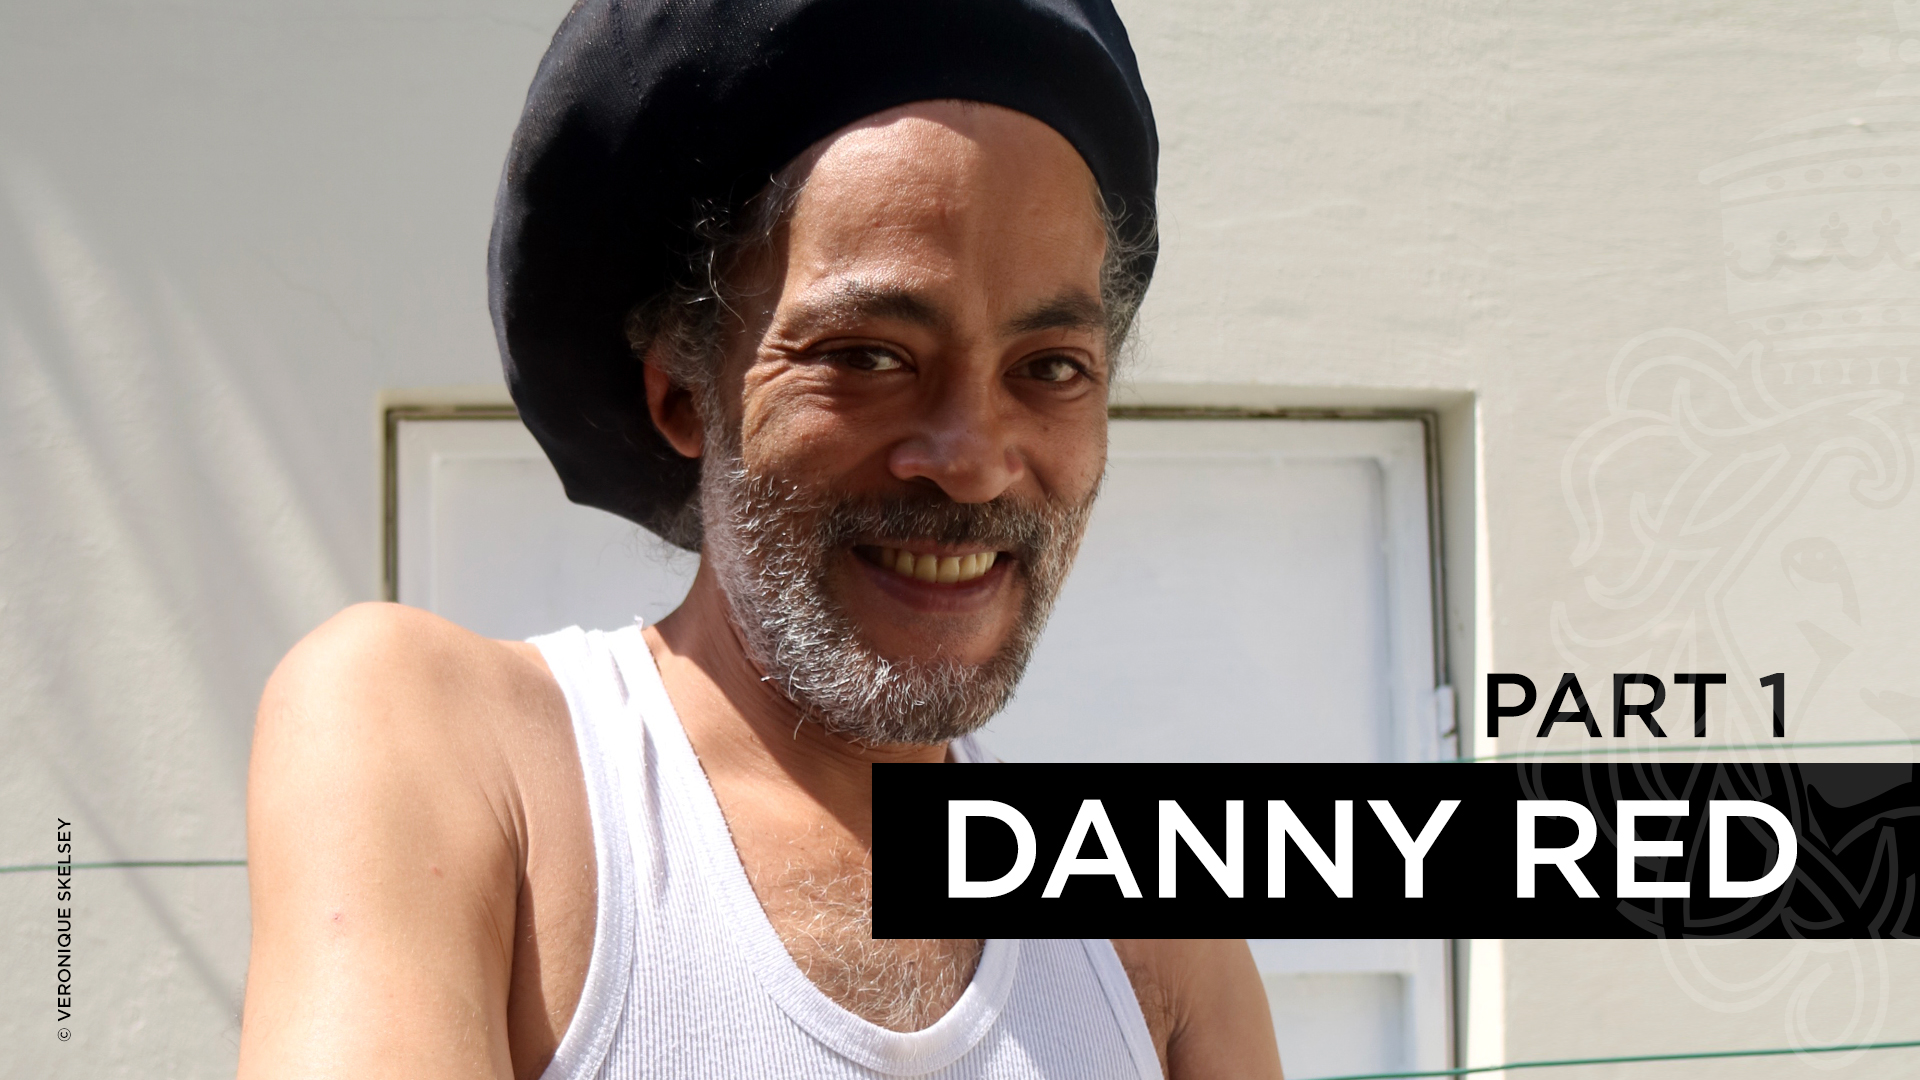 Danny red interview